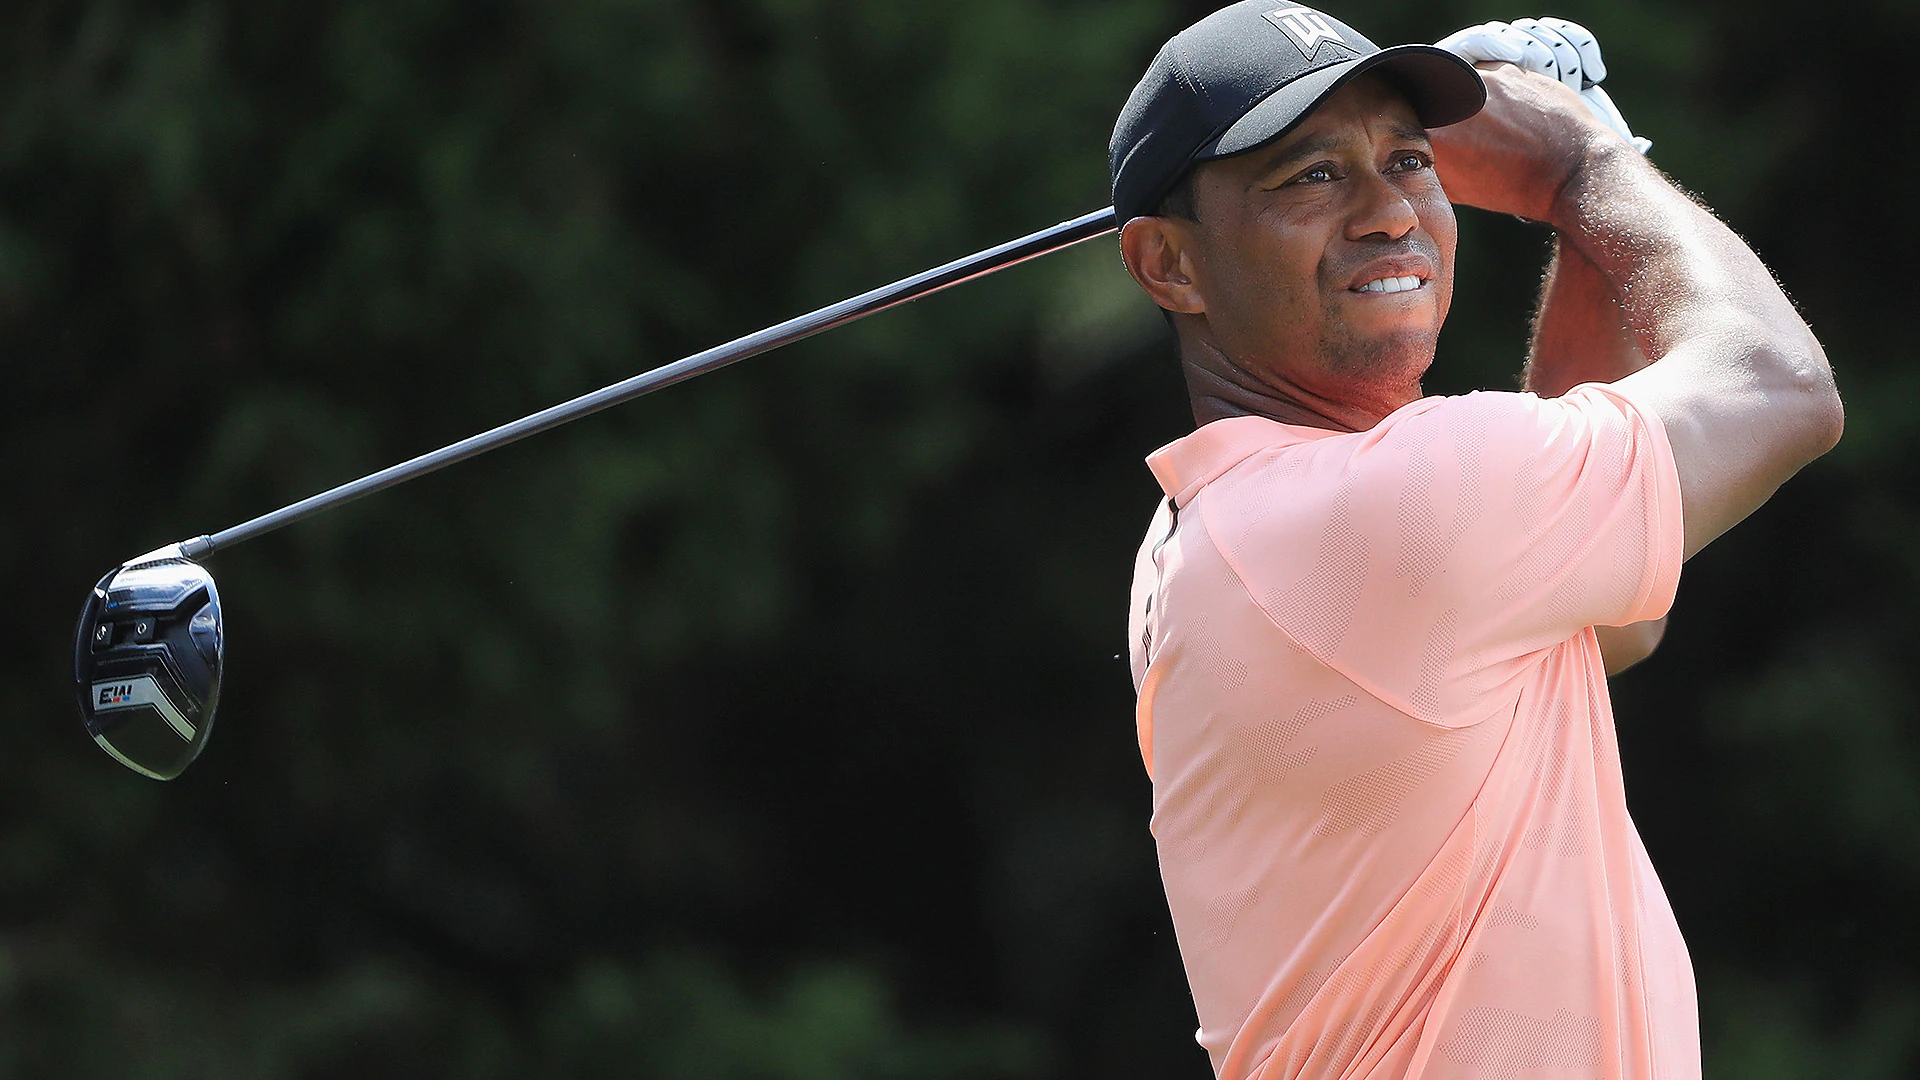 Tiger's driver now a great asset to his game